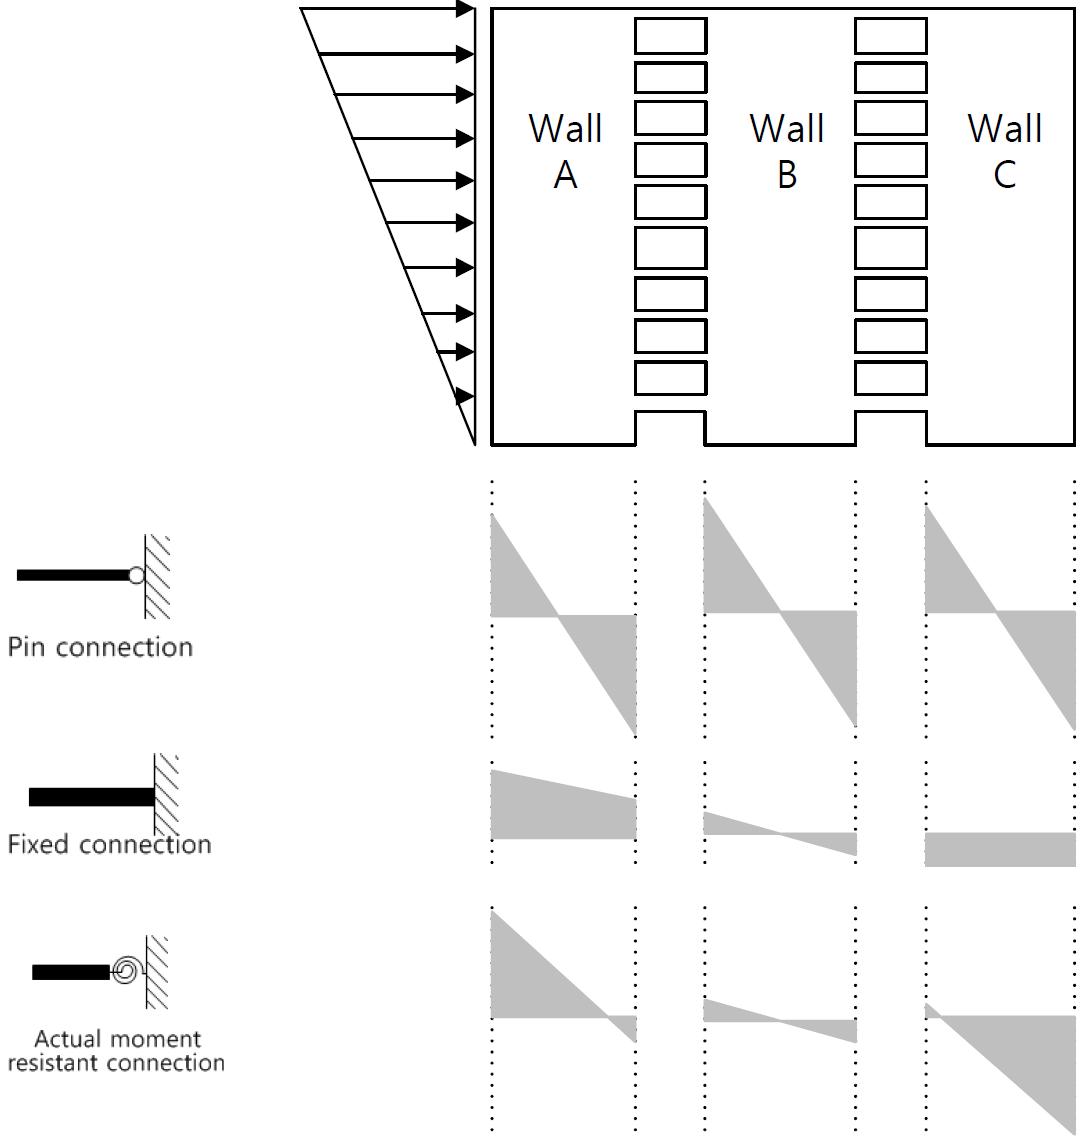 Stress Distribution of Coupled Shearwall according to degree of coupling